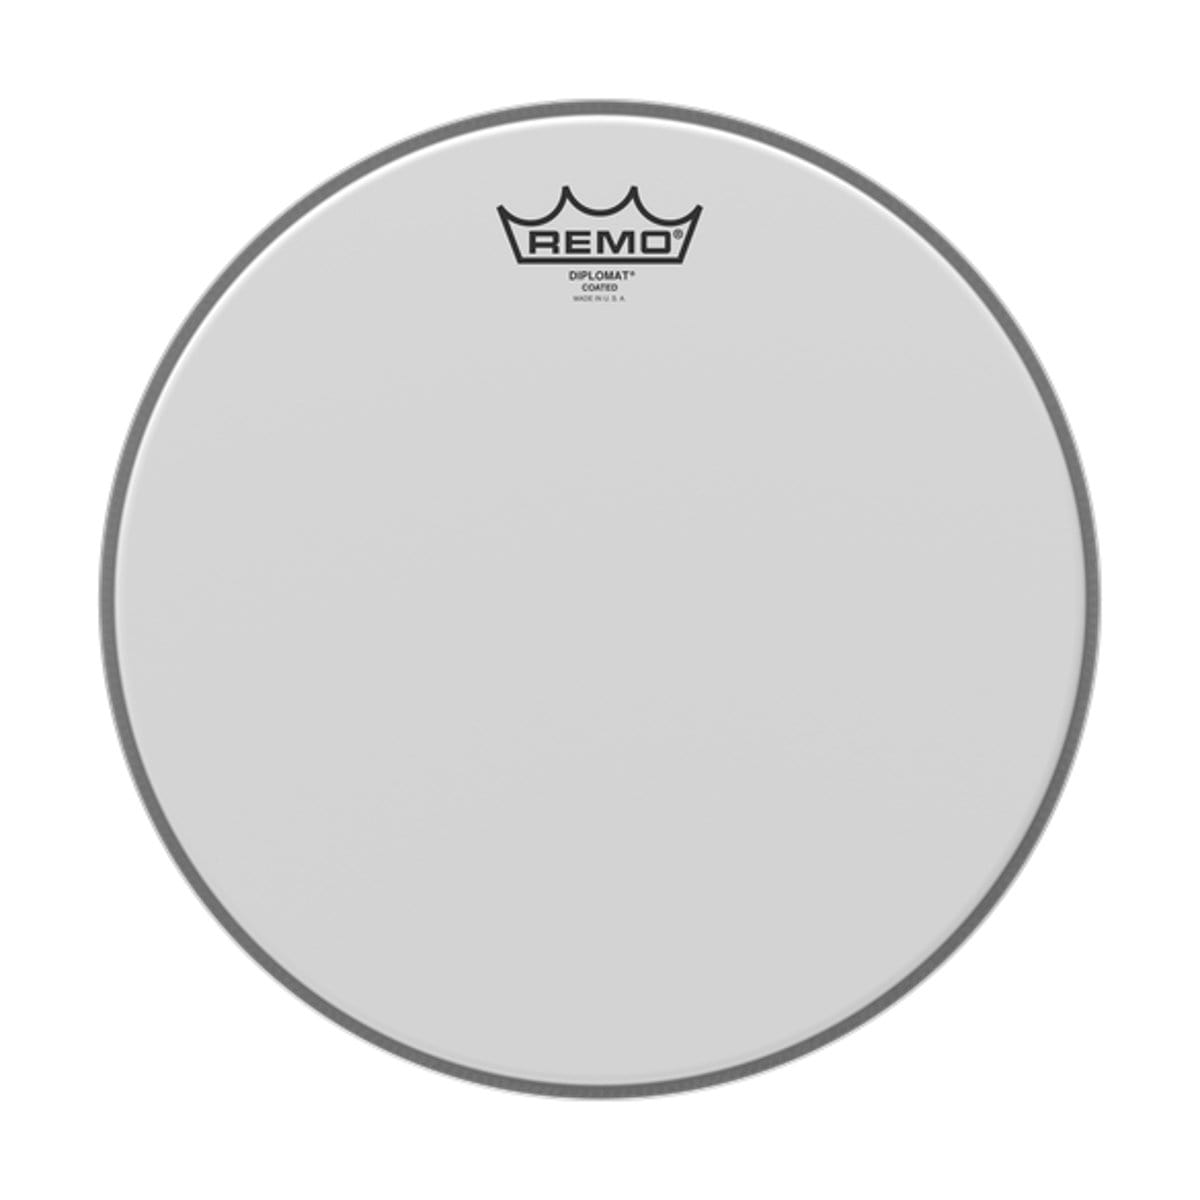 Remo Percussion Remo 12 Inch Drum Head Diplomat Coated BD-0112-00 - Byron Music